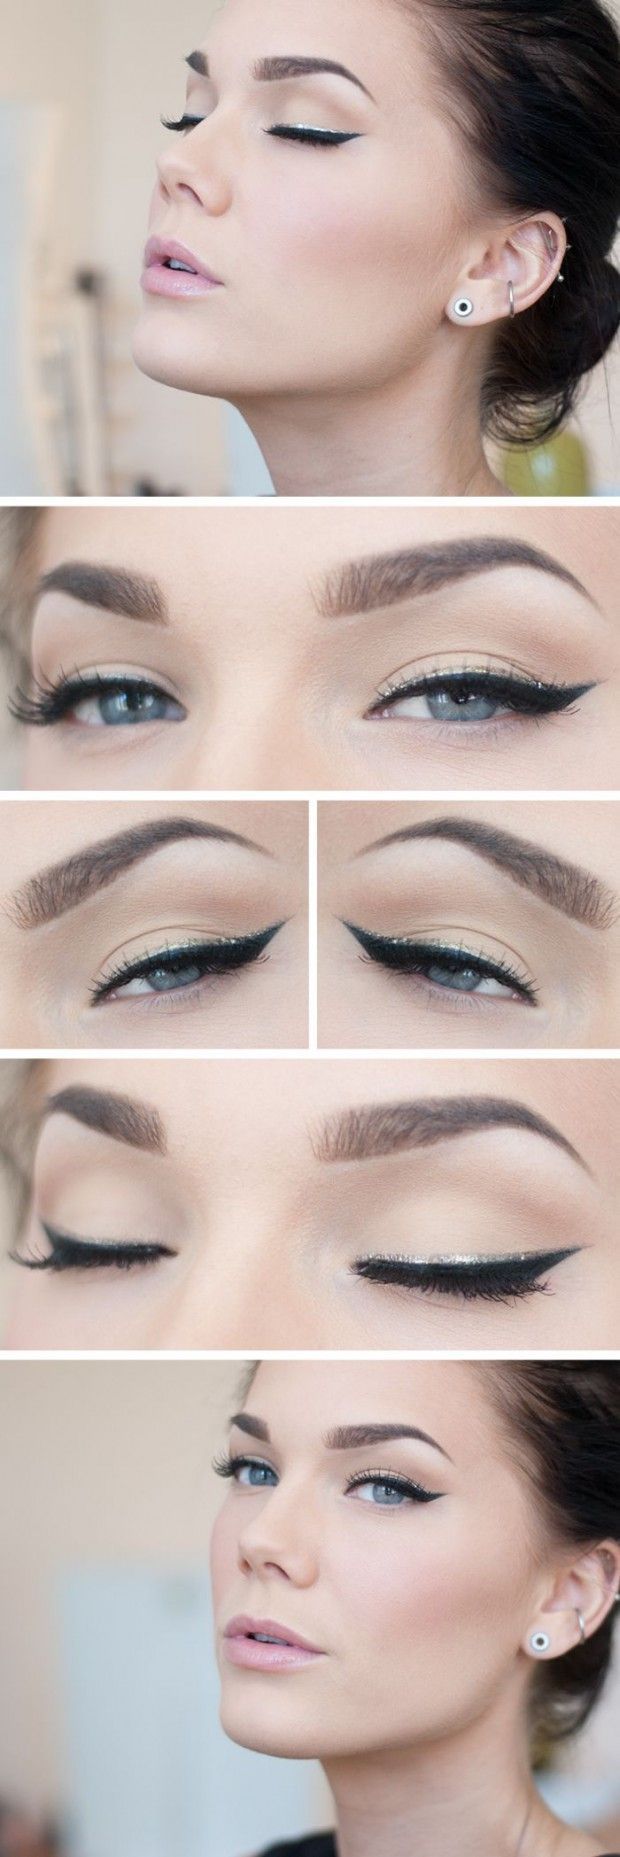 23 Gorgeous Eye-Makeup Tutorials … this one is really beautiful and classy!